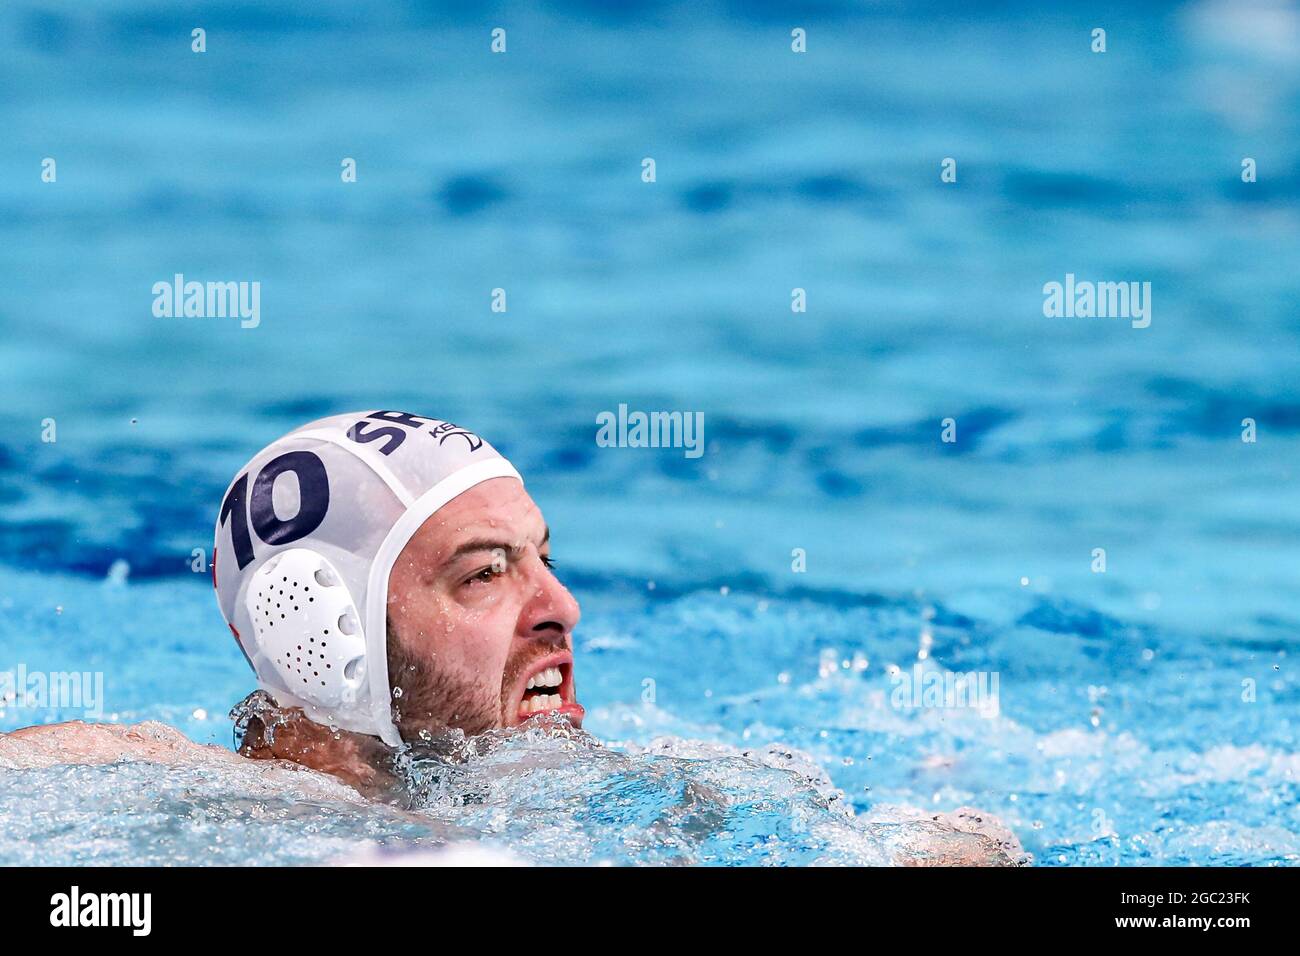 TOKYO, JAPAN - AUGUST 6: Filip Filipovic of Serbia is celebrating his goal during the Tokyo 2020 Olympic Waterpolo Tournament men's Semi Final match between Serbia and Spain at Tatsumi Waterpolo Centre on August 6, 2021 in Tokyo, Japan (Photo by Marcel ter Bals/Orange Pictures) Stock Photo